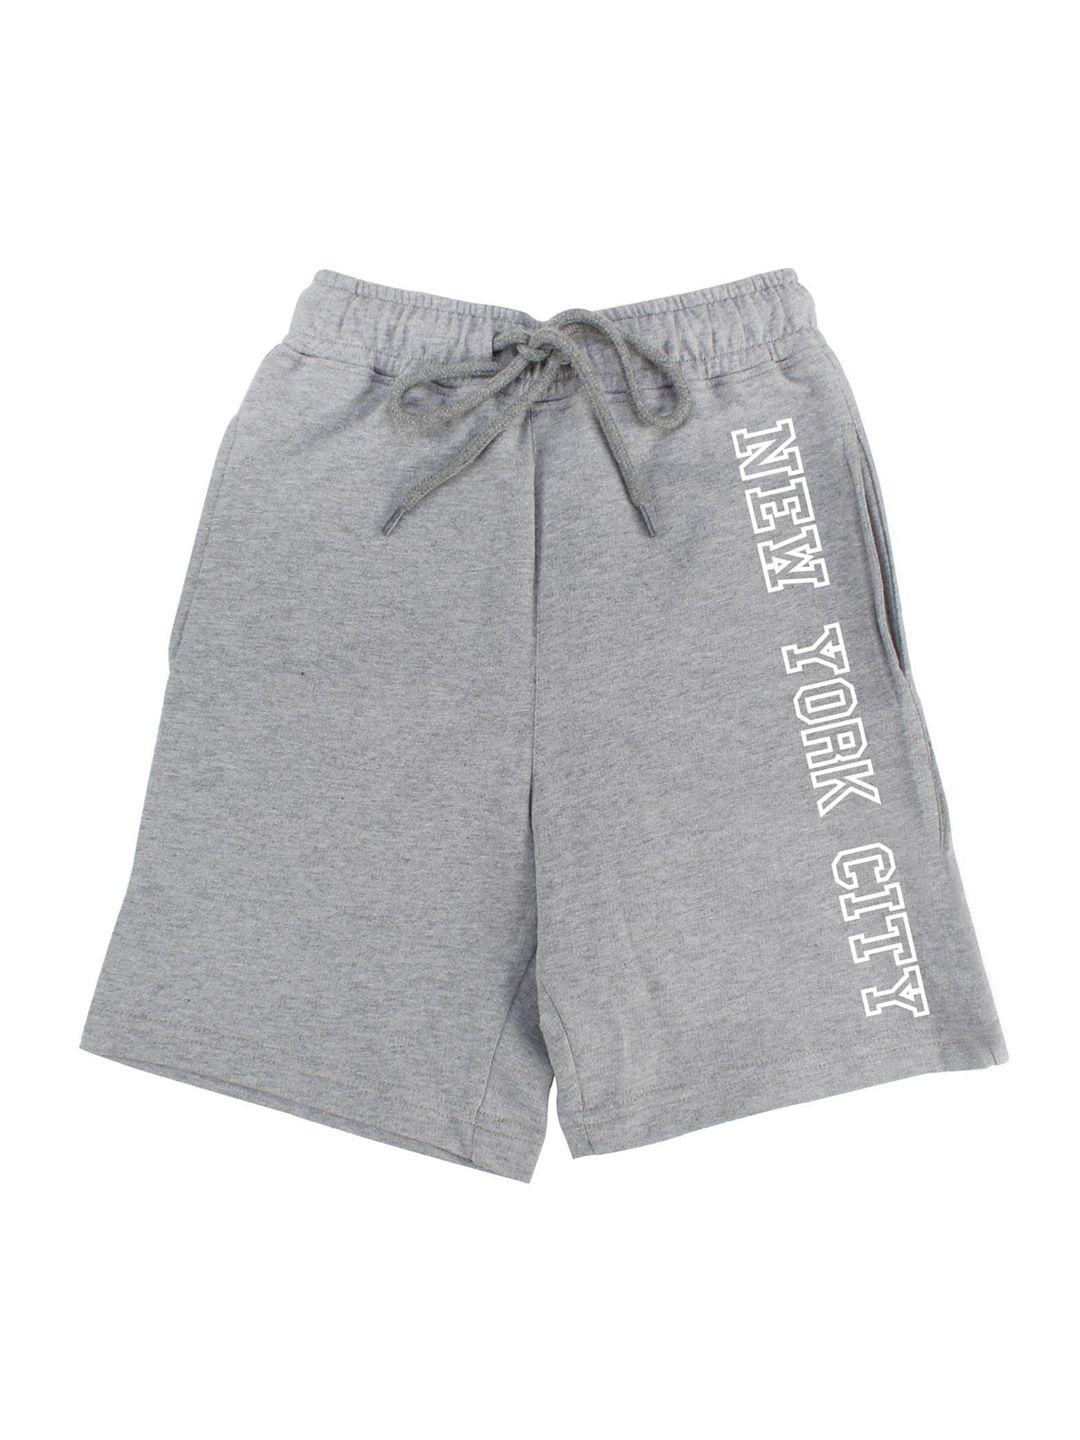 wear your mind boys grey typography printed shorts